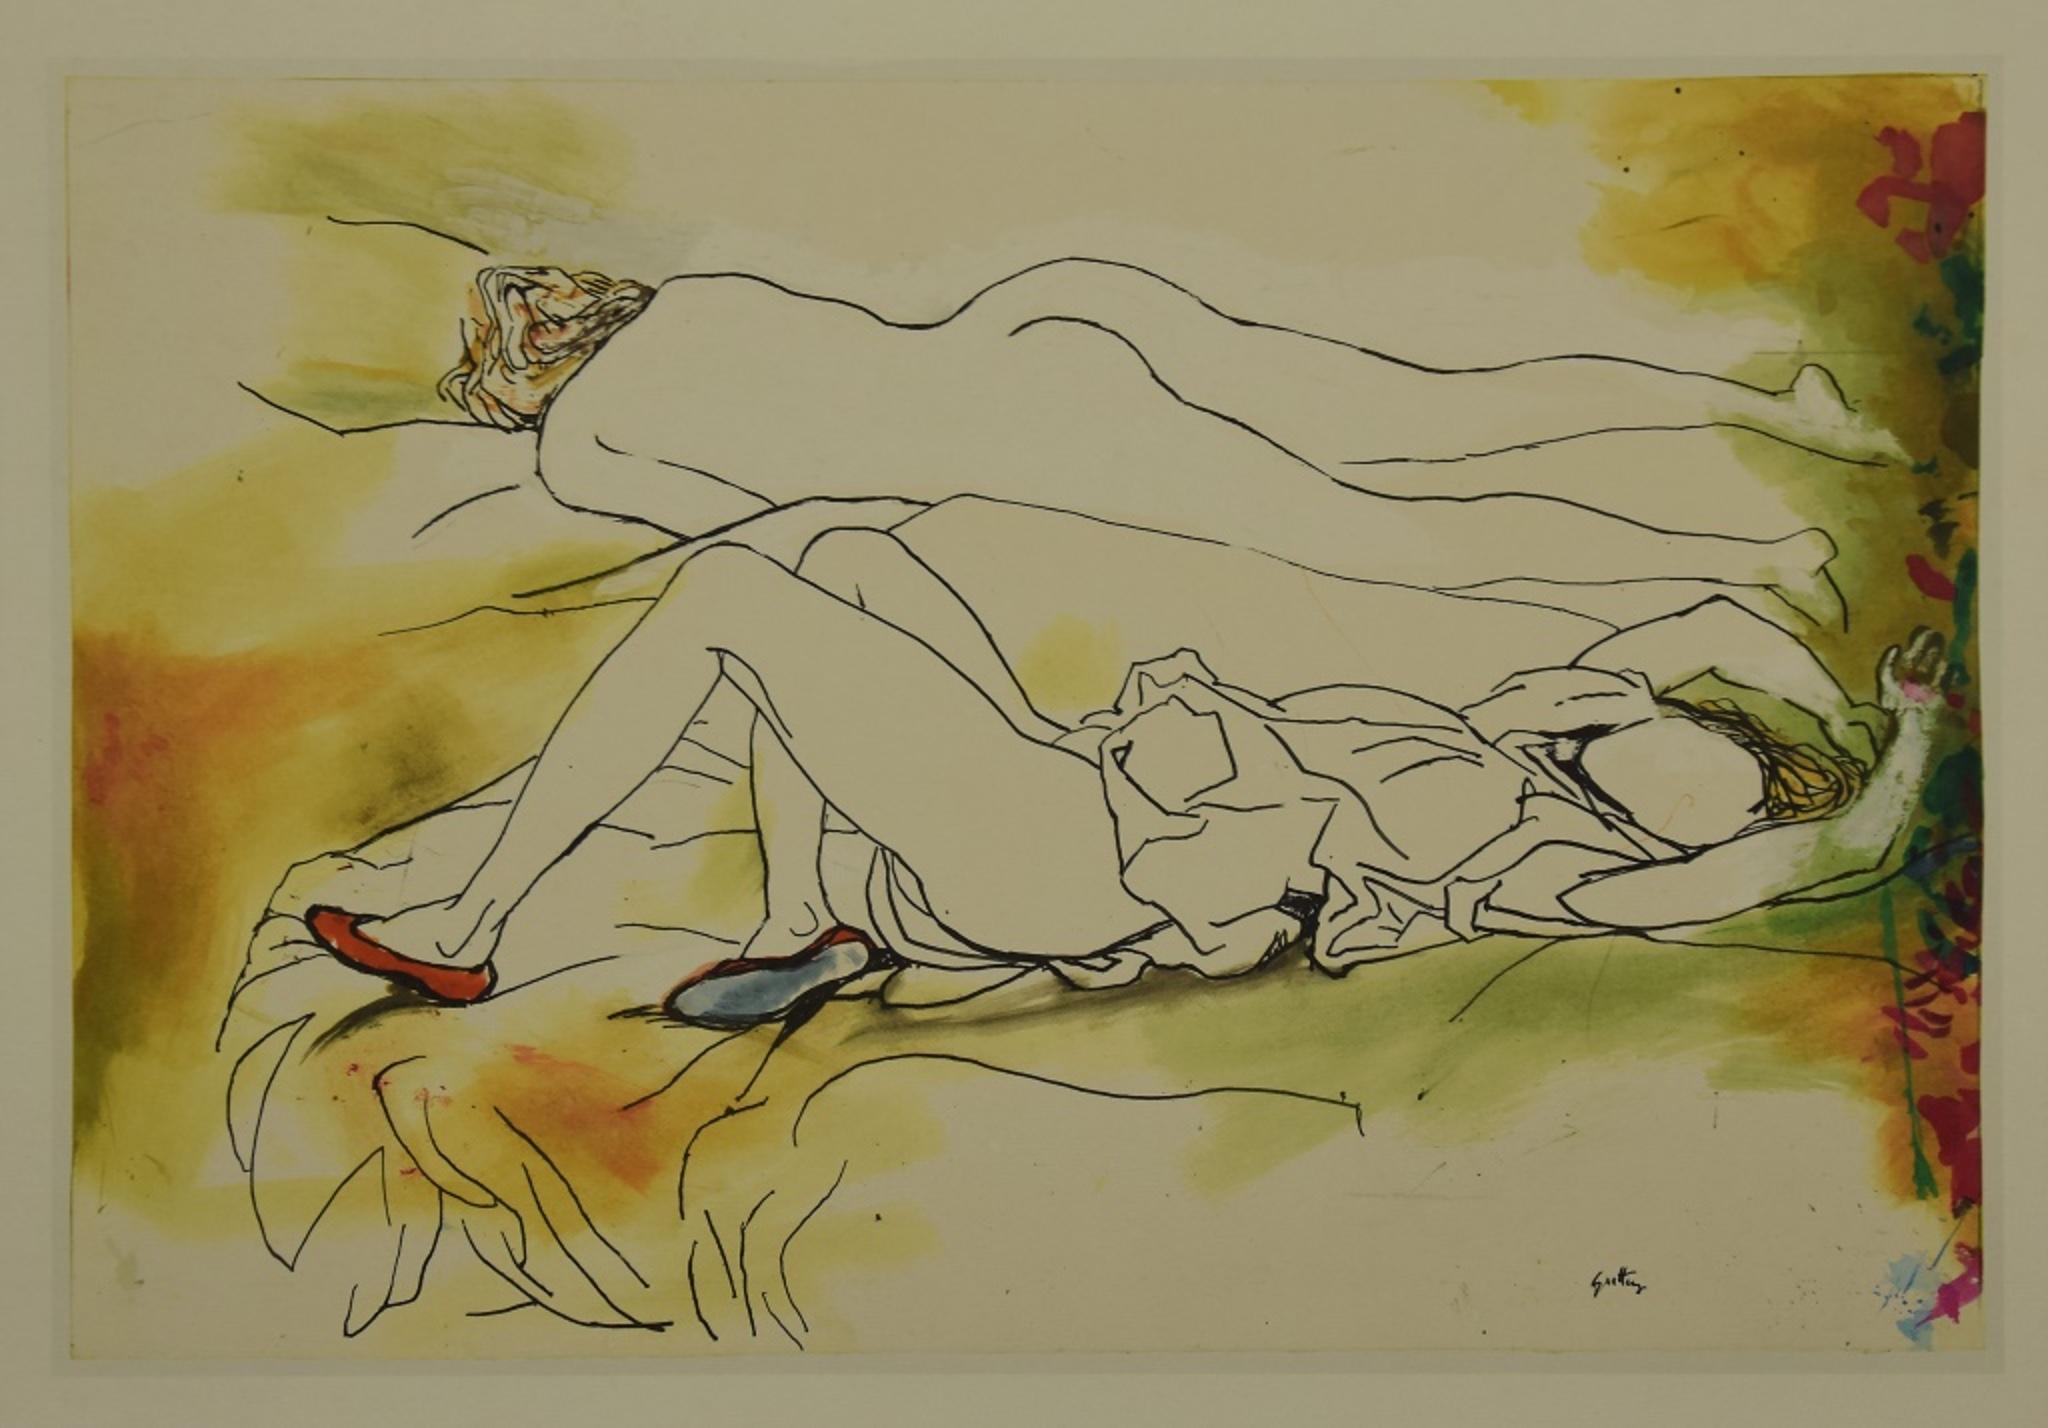 Woman Lying - Vintage Offset Print after Renato Guttuso - Late 20th Century